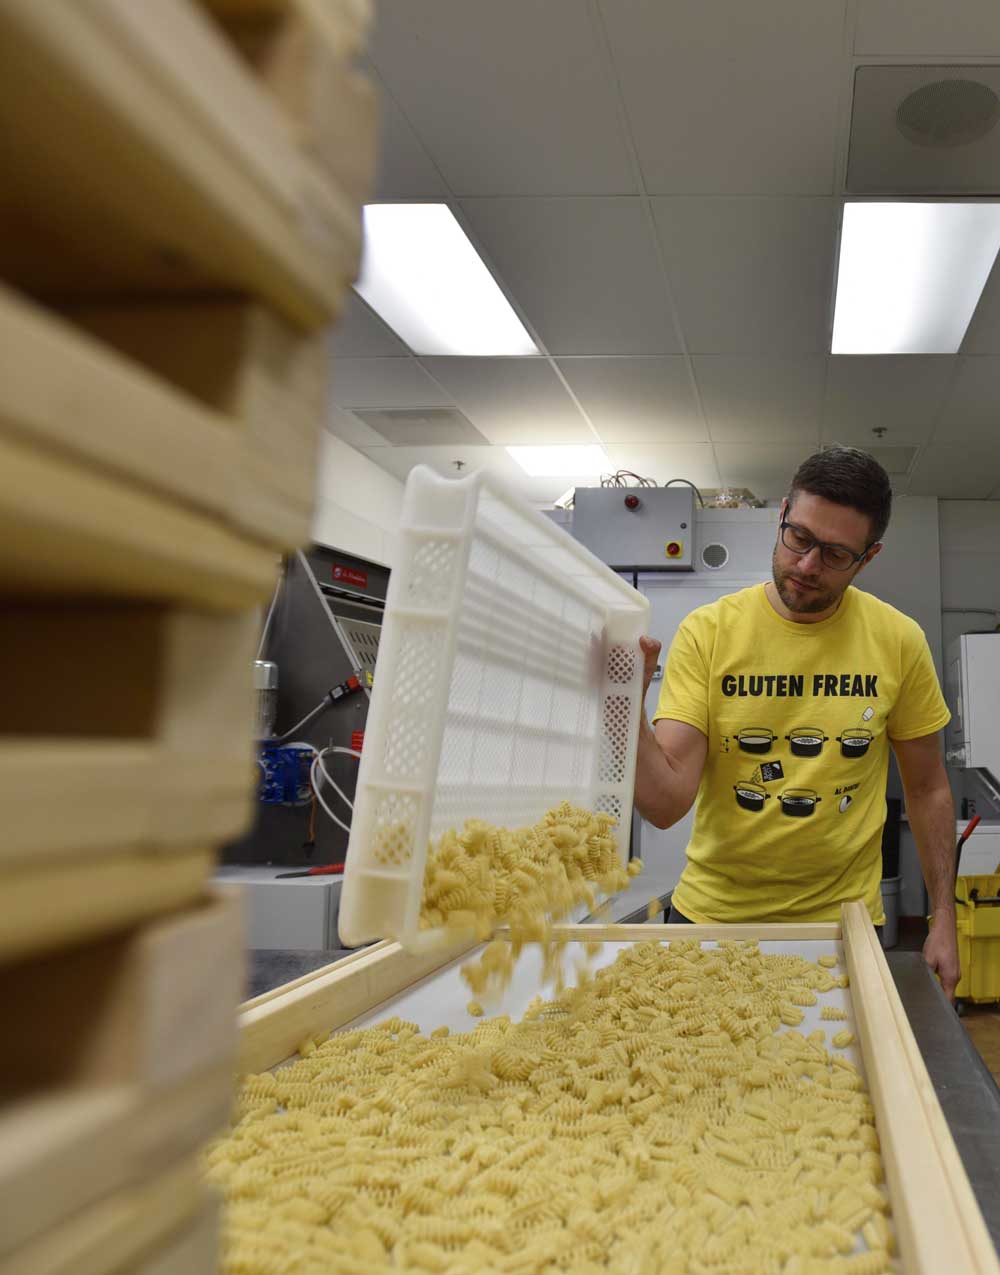 Dario moves freshly formed pasta to the drying tray.